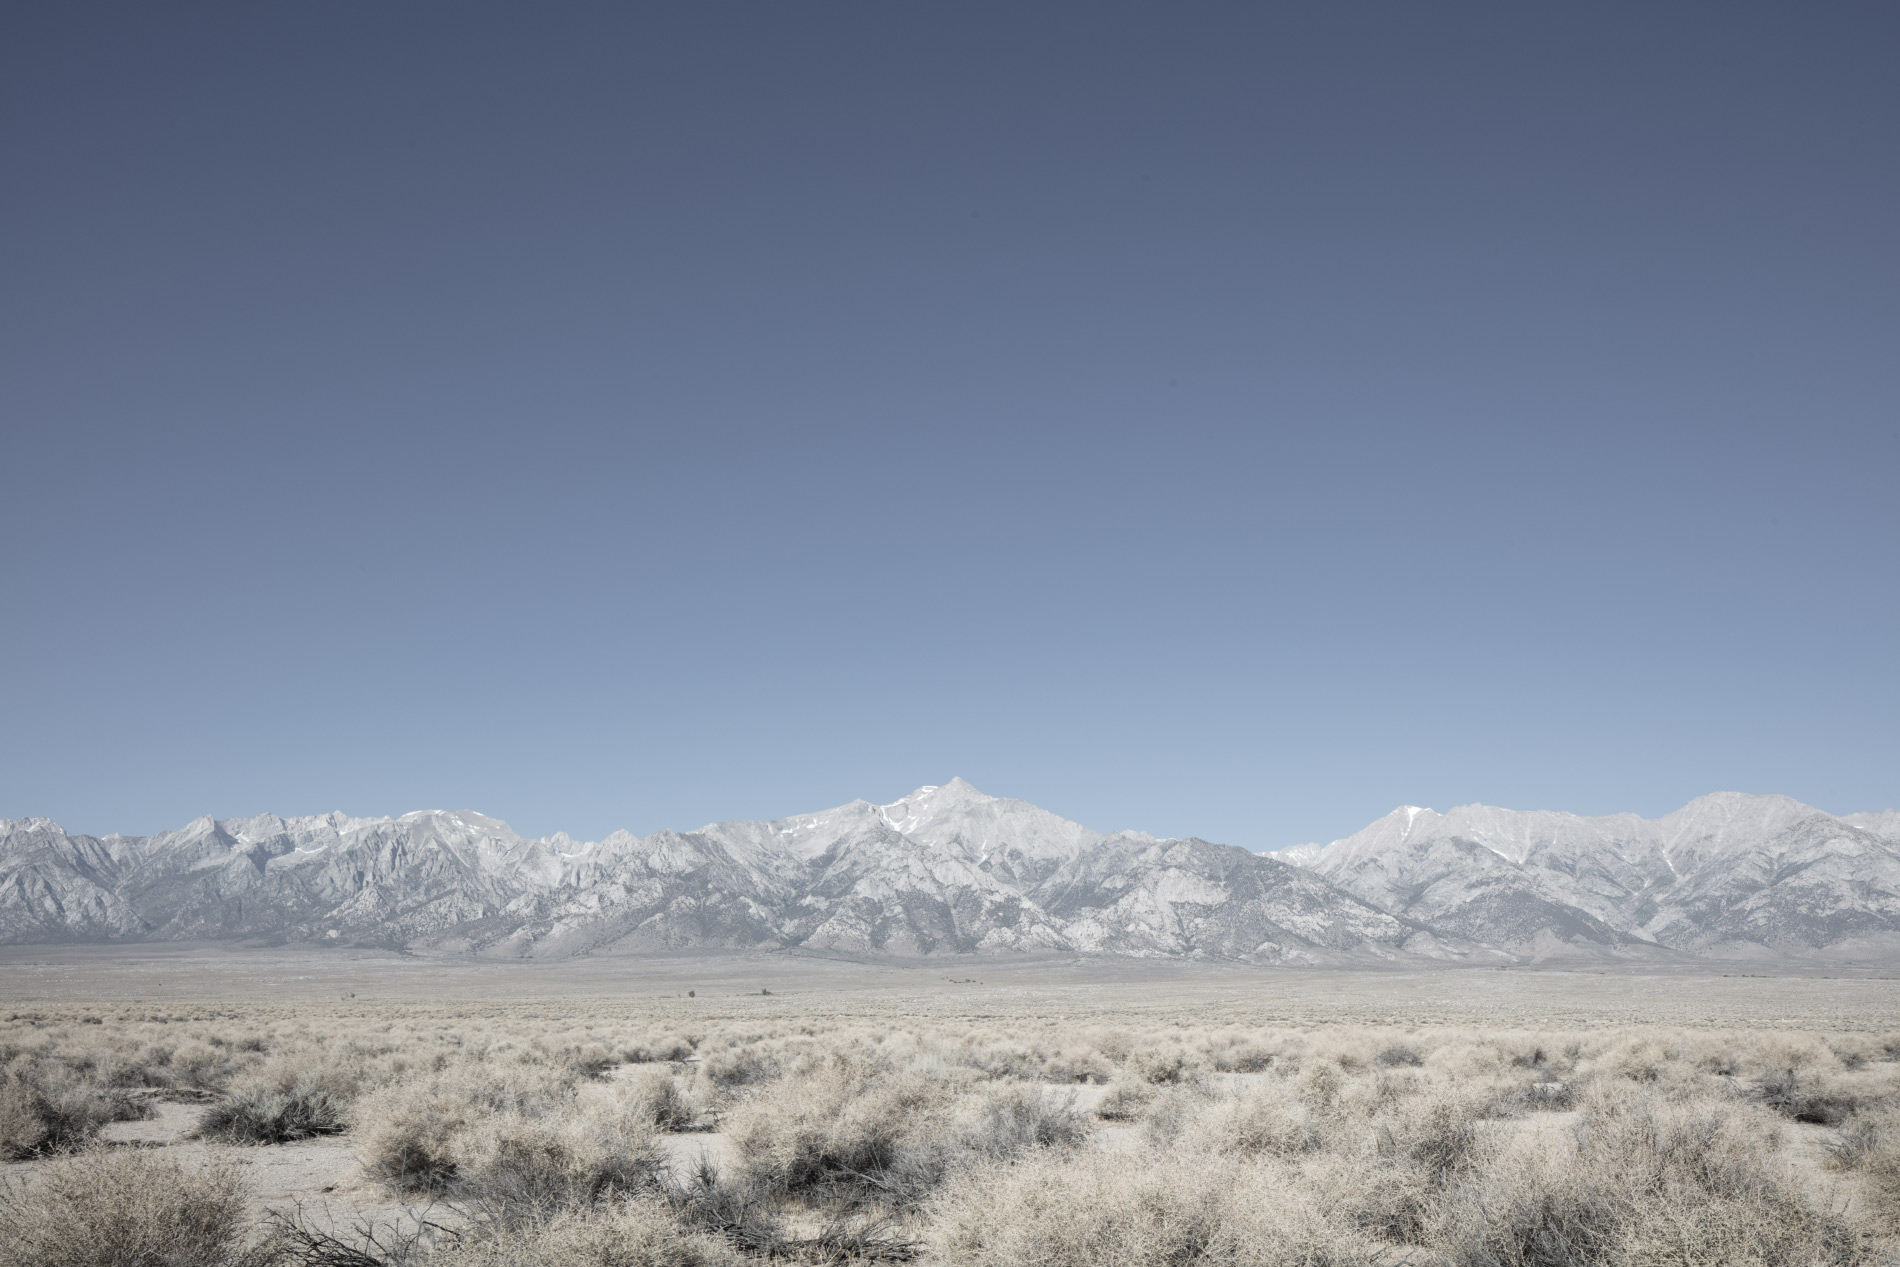   The landscape they saw upon arrival (Manzanar, California)  